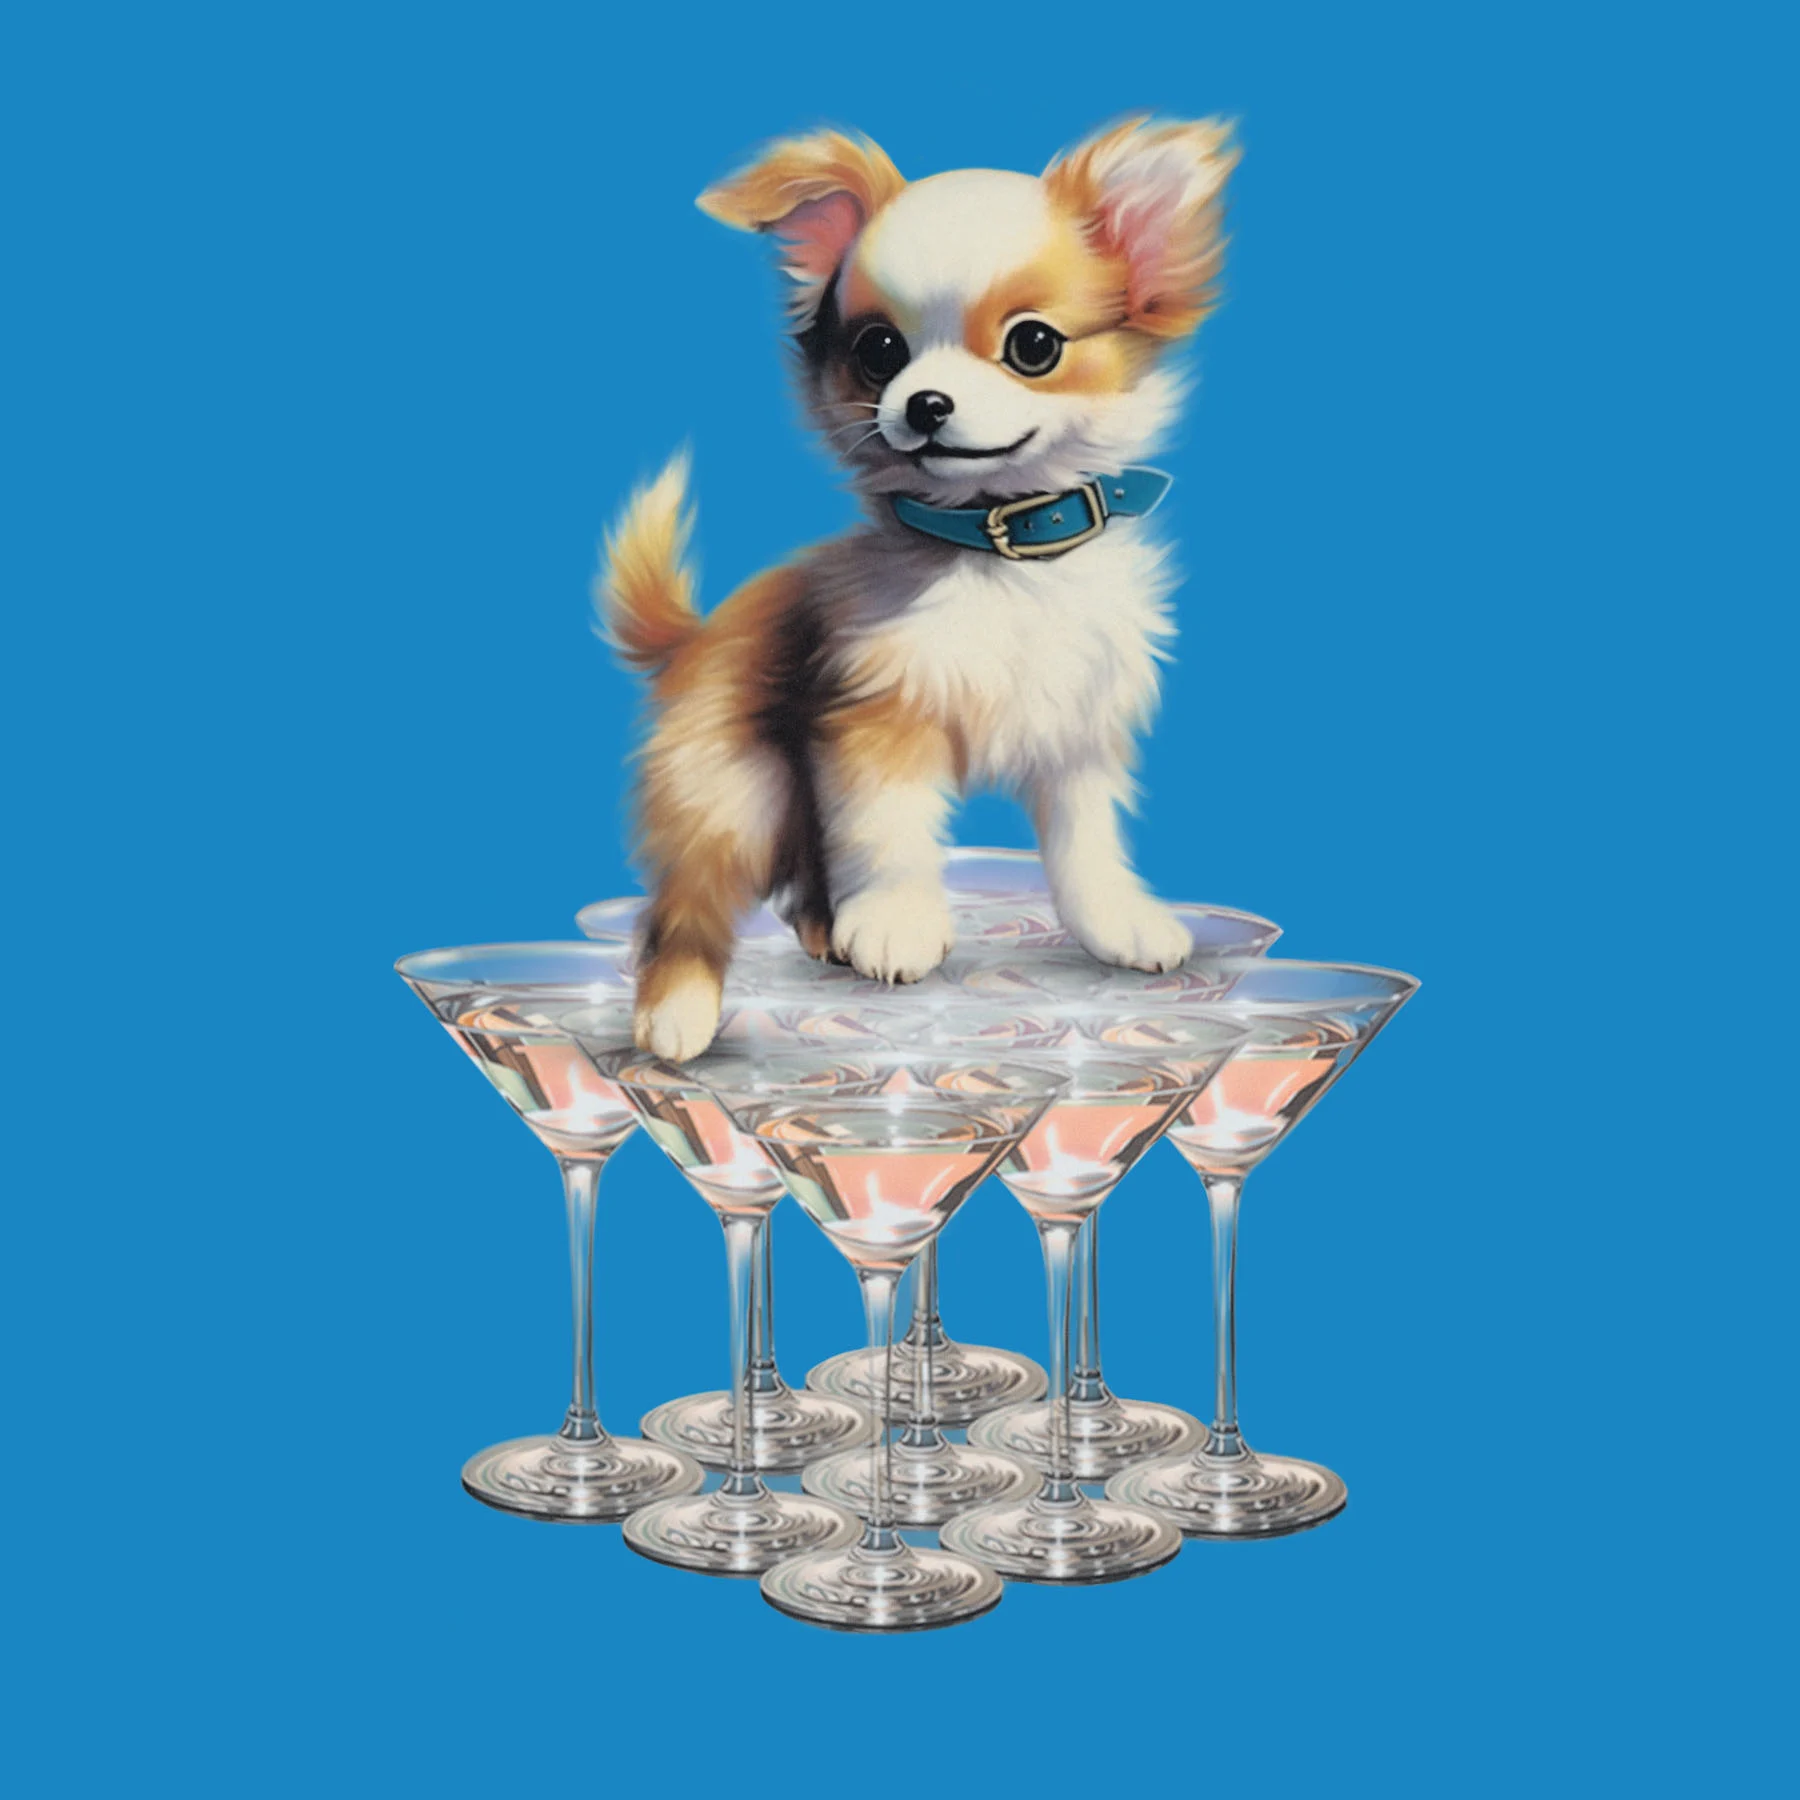 A digital illustration of a chihuahua dog standing on top of many martini glasses against a blue background.
